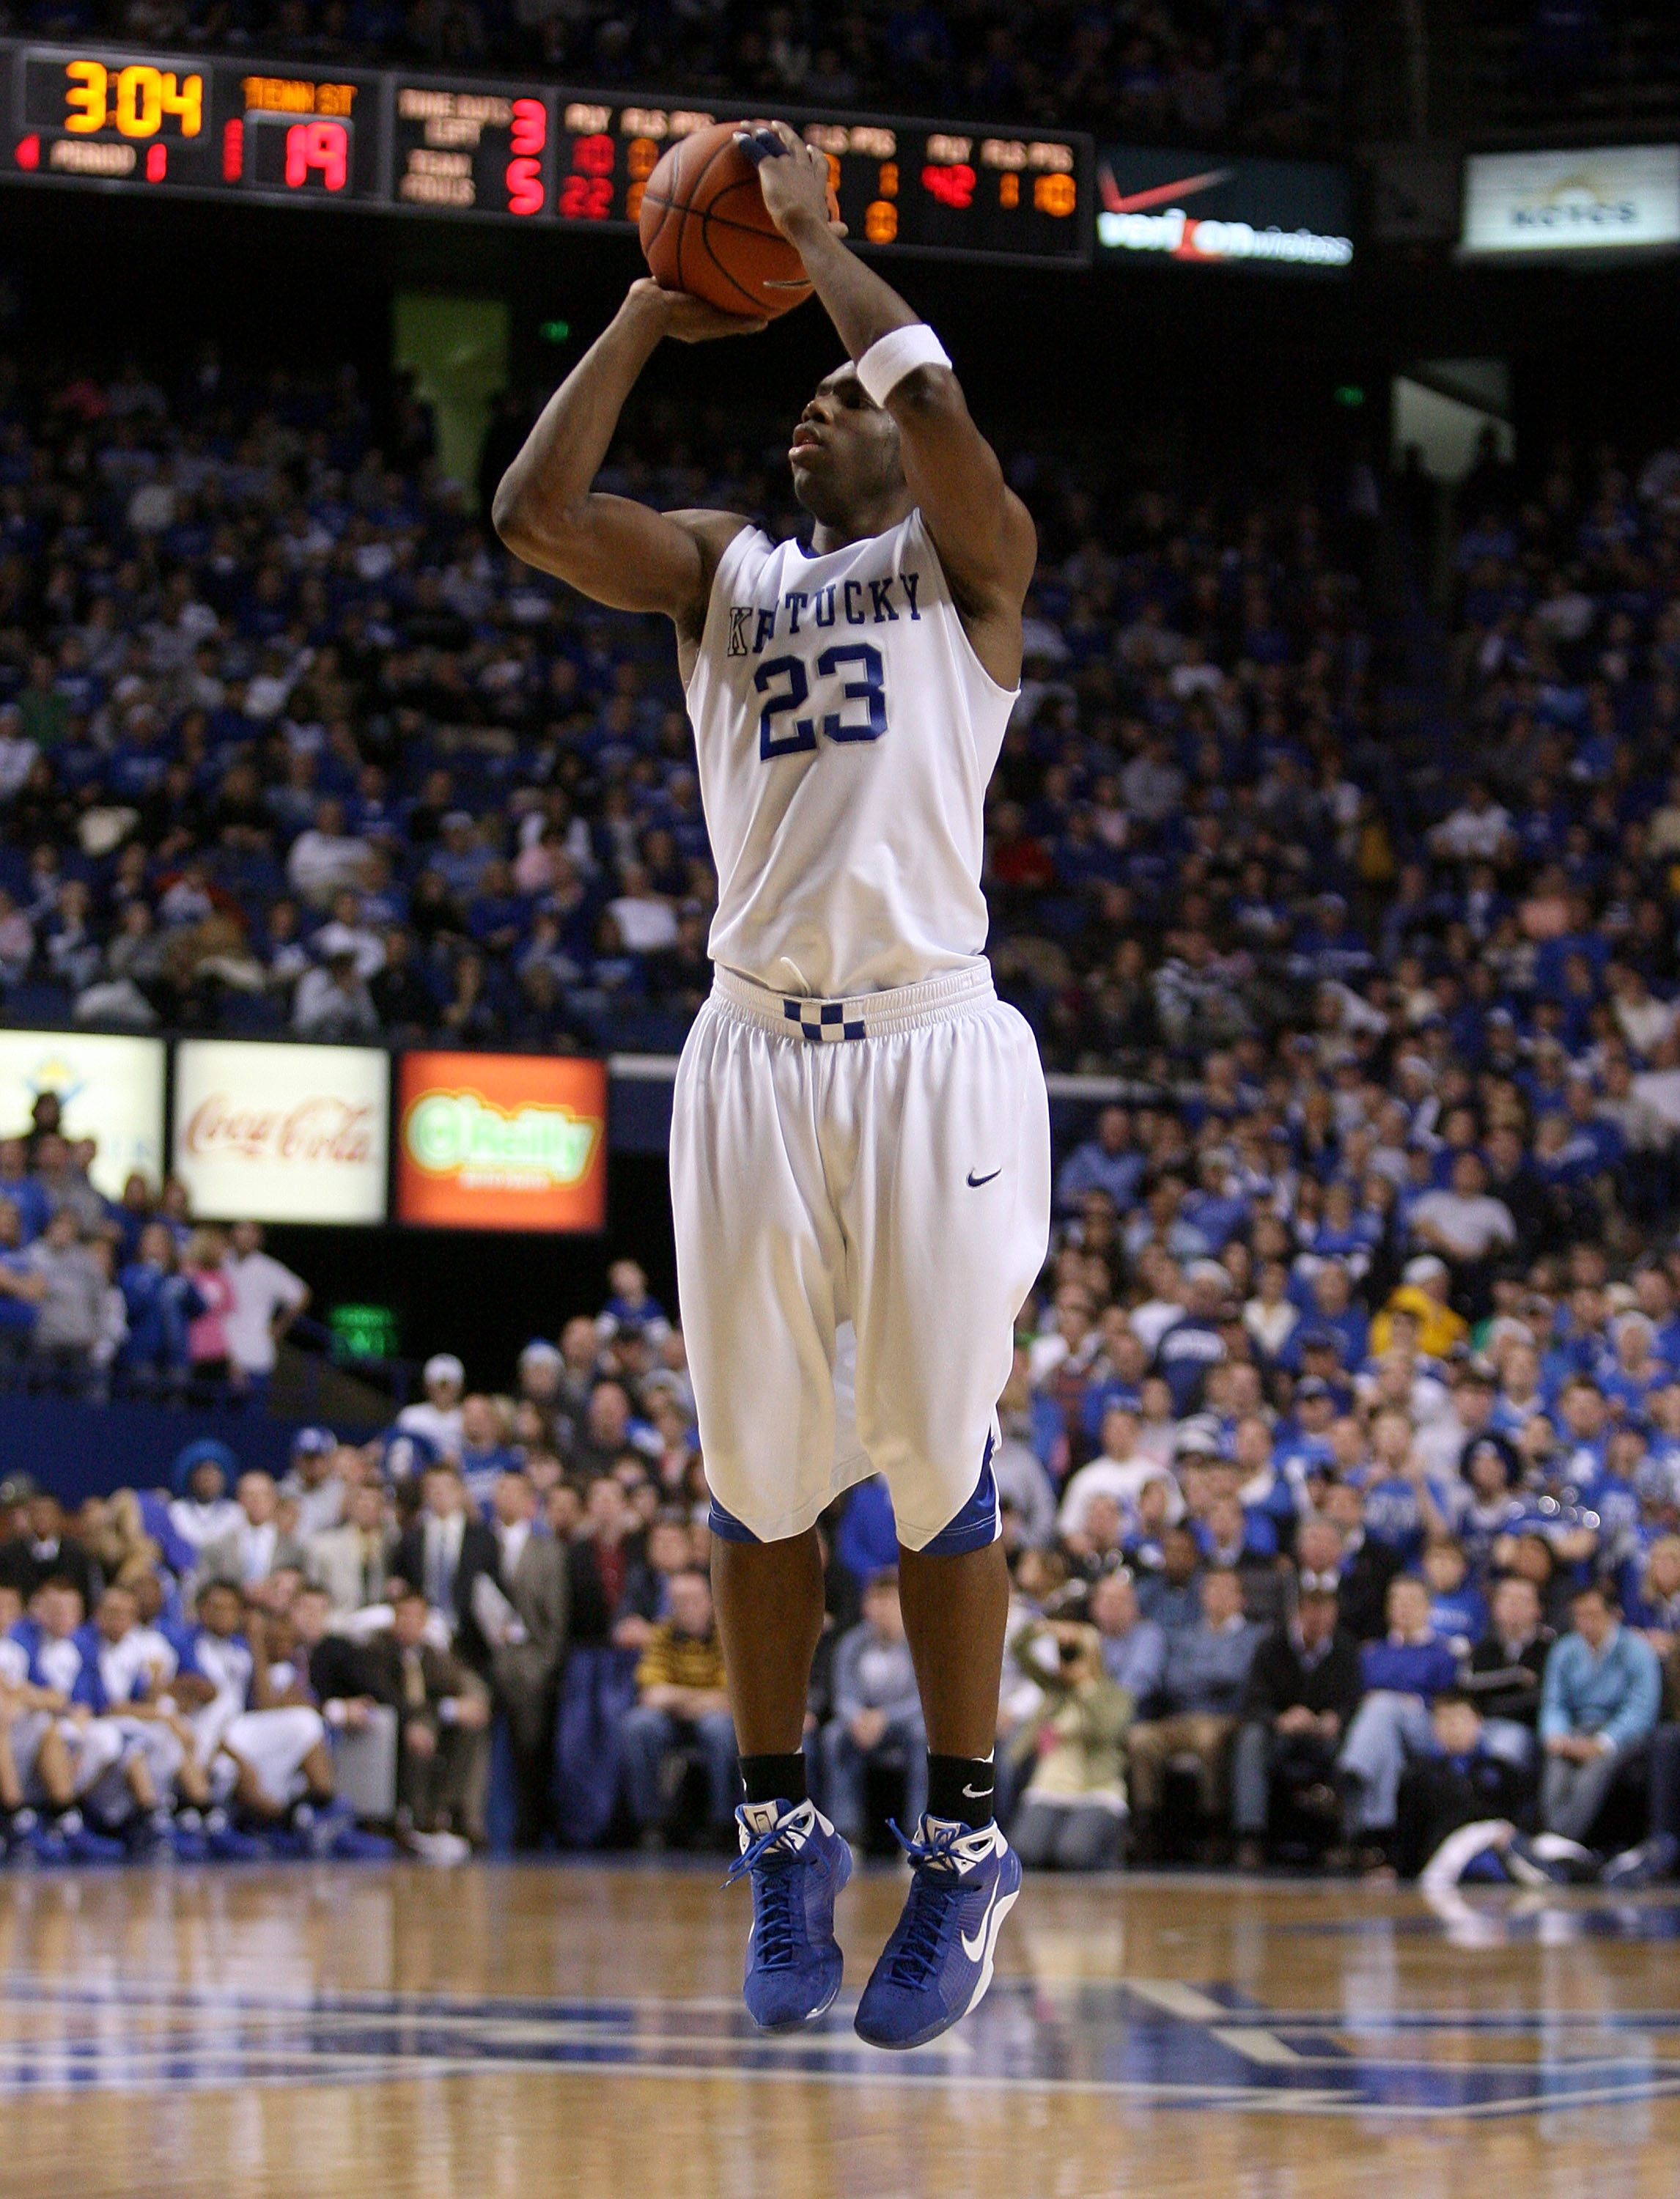 LEXINGTON, KY - DECEMBER 22:  Jodie Meeks #23 of the Kentucky Wildcats shoots the ball during the game against the Tennessee State Tigers at Rupp Arena on December 22, 2008 in Lexington,Kentucky.  (Photo by Andy Lyons/Getty Images)